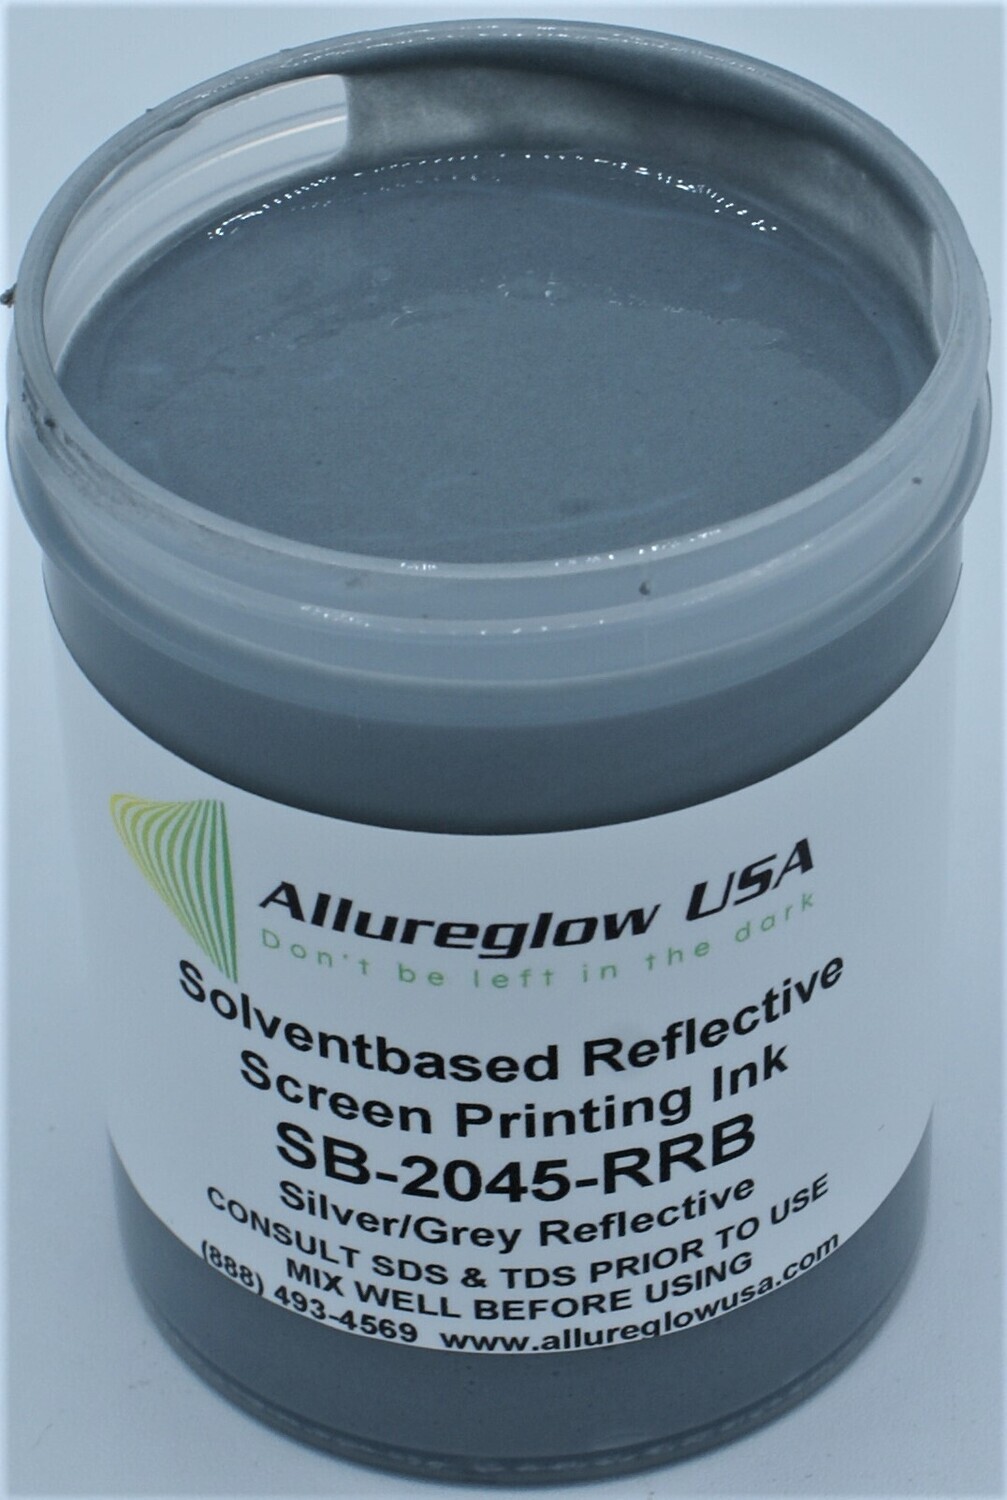 SB-2045-RRB-GL   SOLVENT BASED SILVER/GREY REFLECTIVE SCREEN PRINTING INK - GALLON